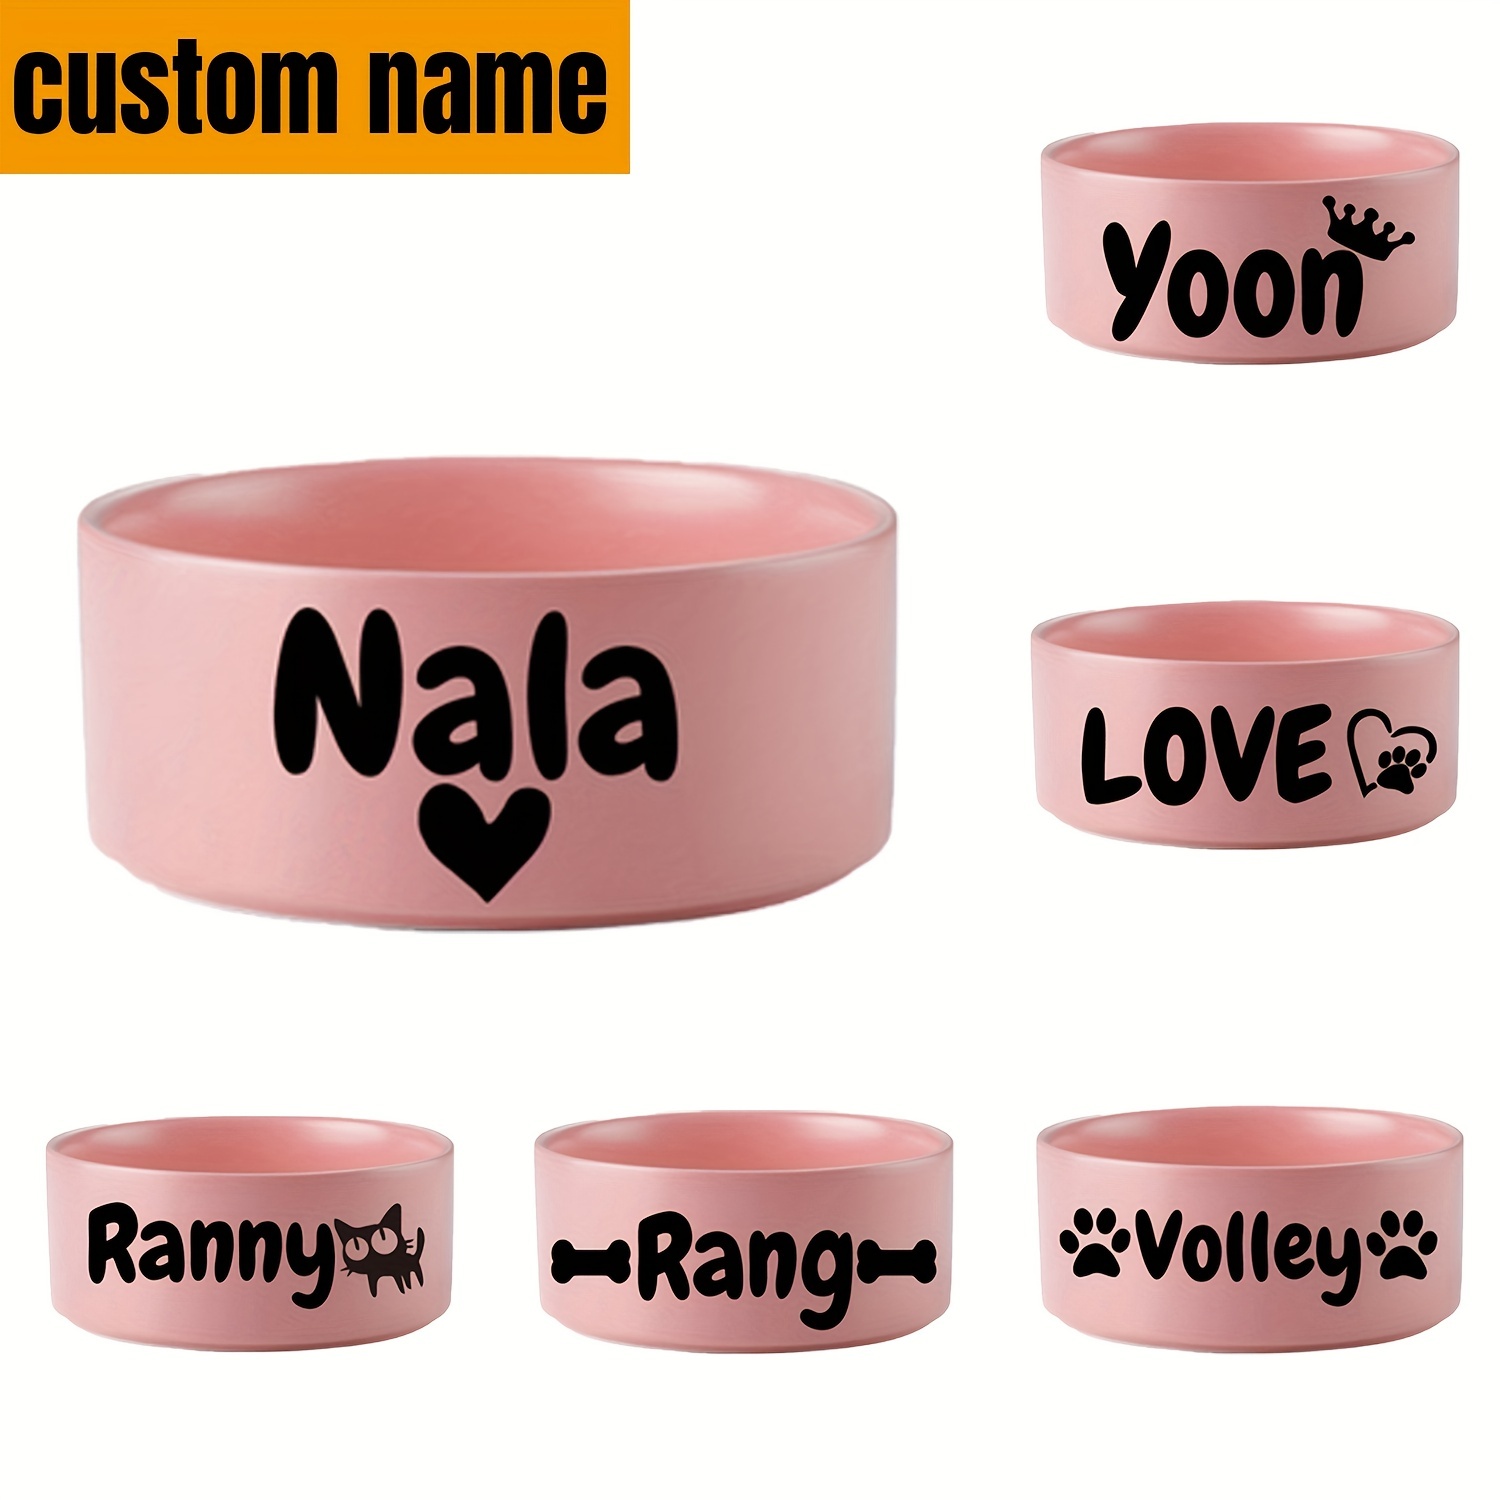 

Personalized Ceramic Pet Bowl - Non-slip Bottom, No Overflow, Custom Name - Ideal For Dogs, Cats, Puppies, And Kittens.